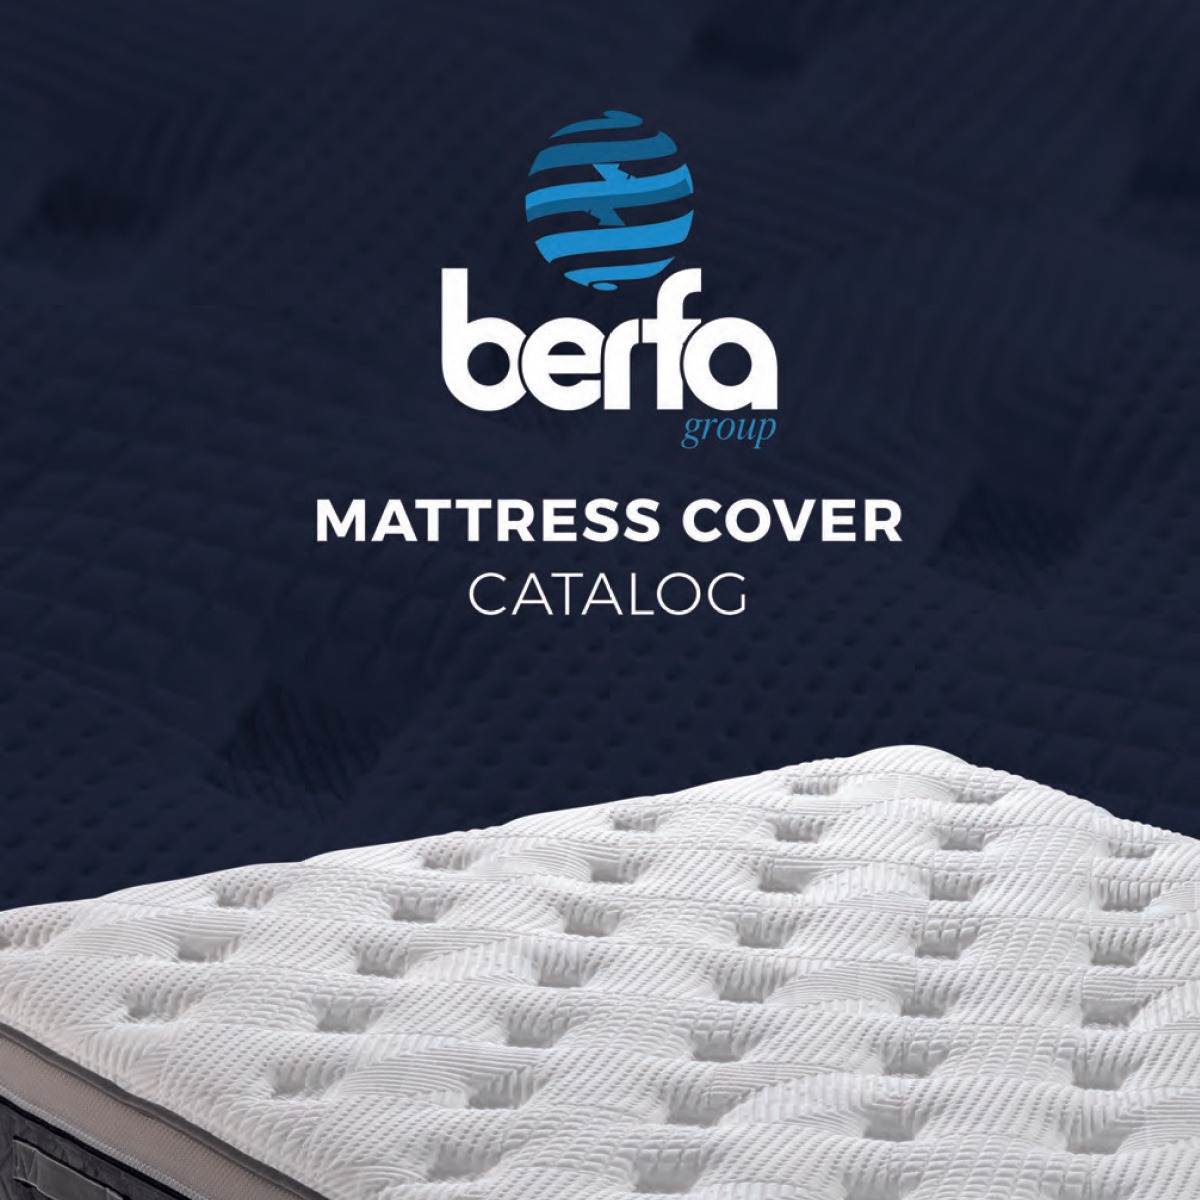 Stylish Design Mattress Covers | Home and Hotel Furniture| Colors and Pattern | Quilted Design| Comfortable and Coziness